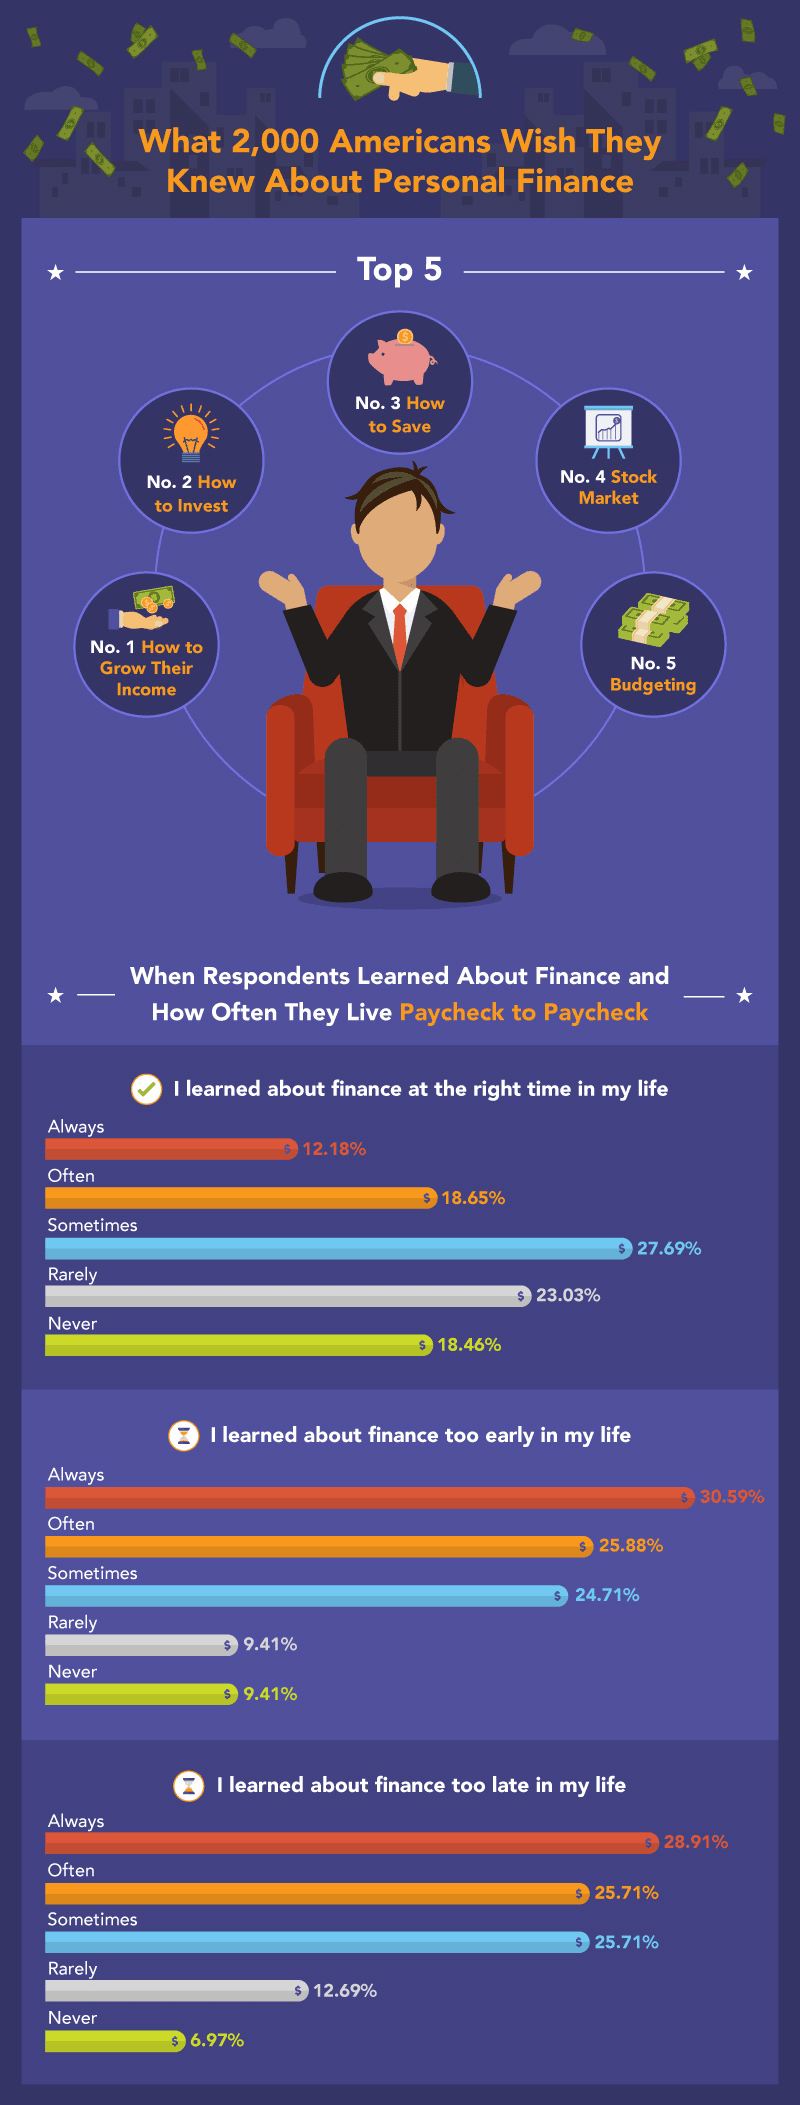 Infographic explaining what Americans wish they knew about personal finance, featuring top 5 regrets, survey statistics on learning about finance, and graphic illustrations of people and money icons.